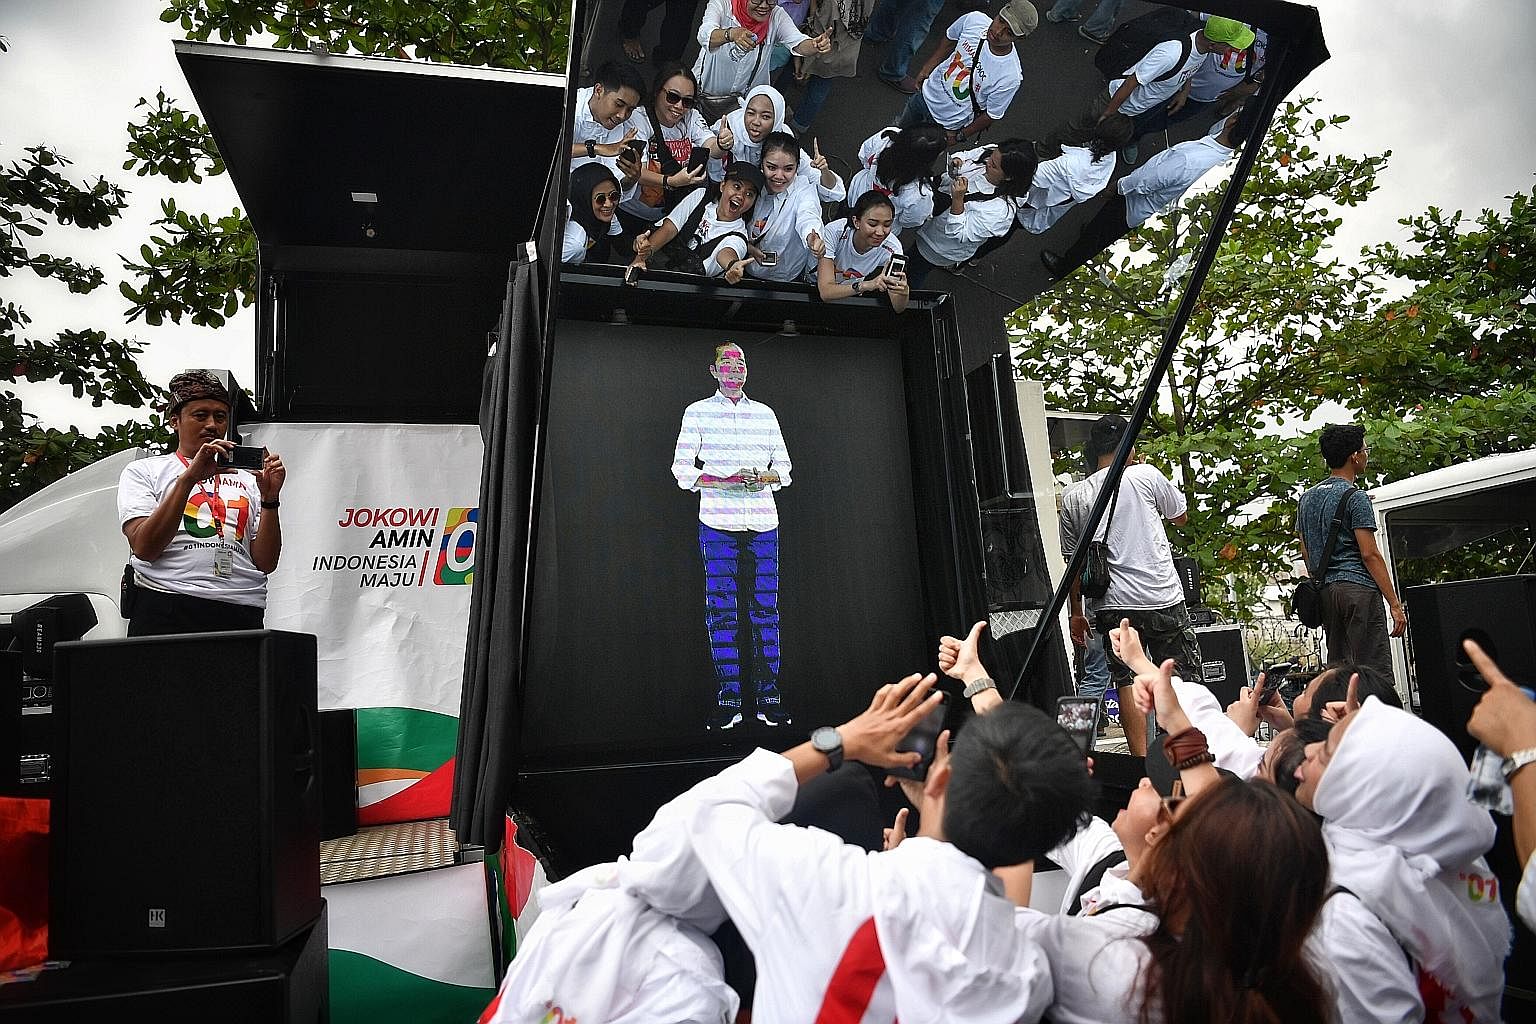 A holographic image of President Joko Widodo at a carnival in Banten province on Sunday. An analysis by consulting group Control Risks indicates that unless something unforeseen undermines his appeal with mainstream Muslim voters, he should be re-ele